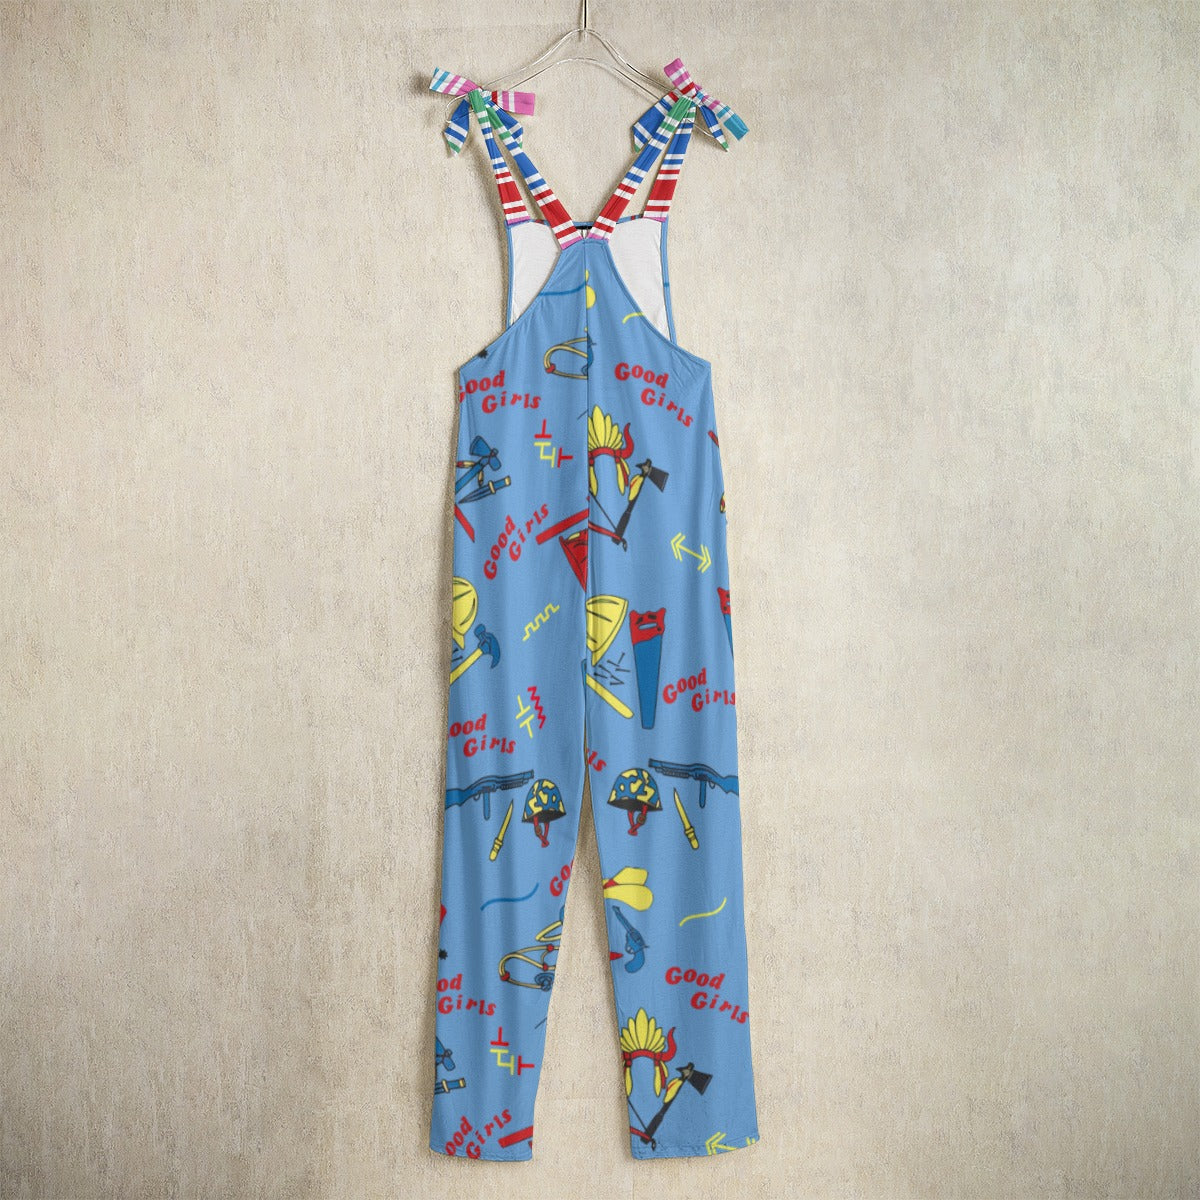 Good Girls Overall Jumpsuit